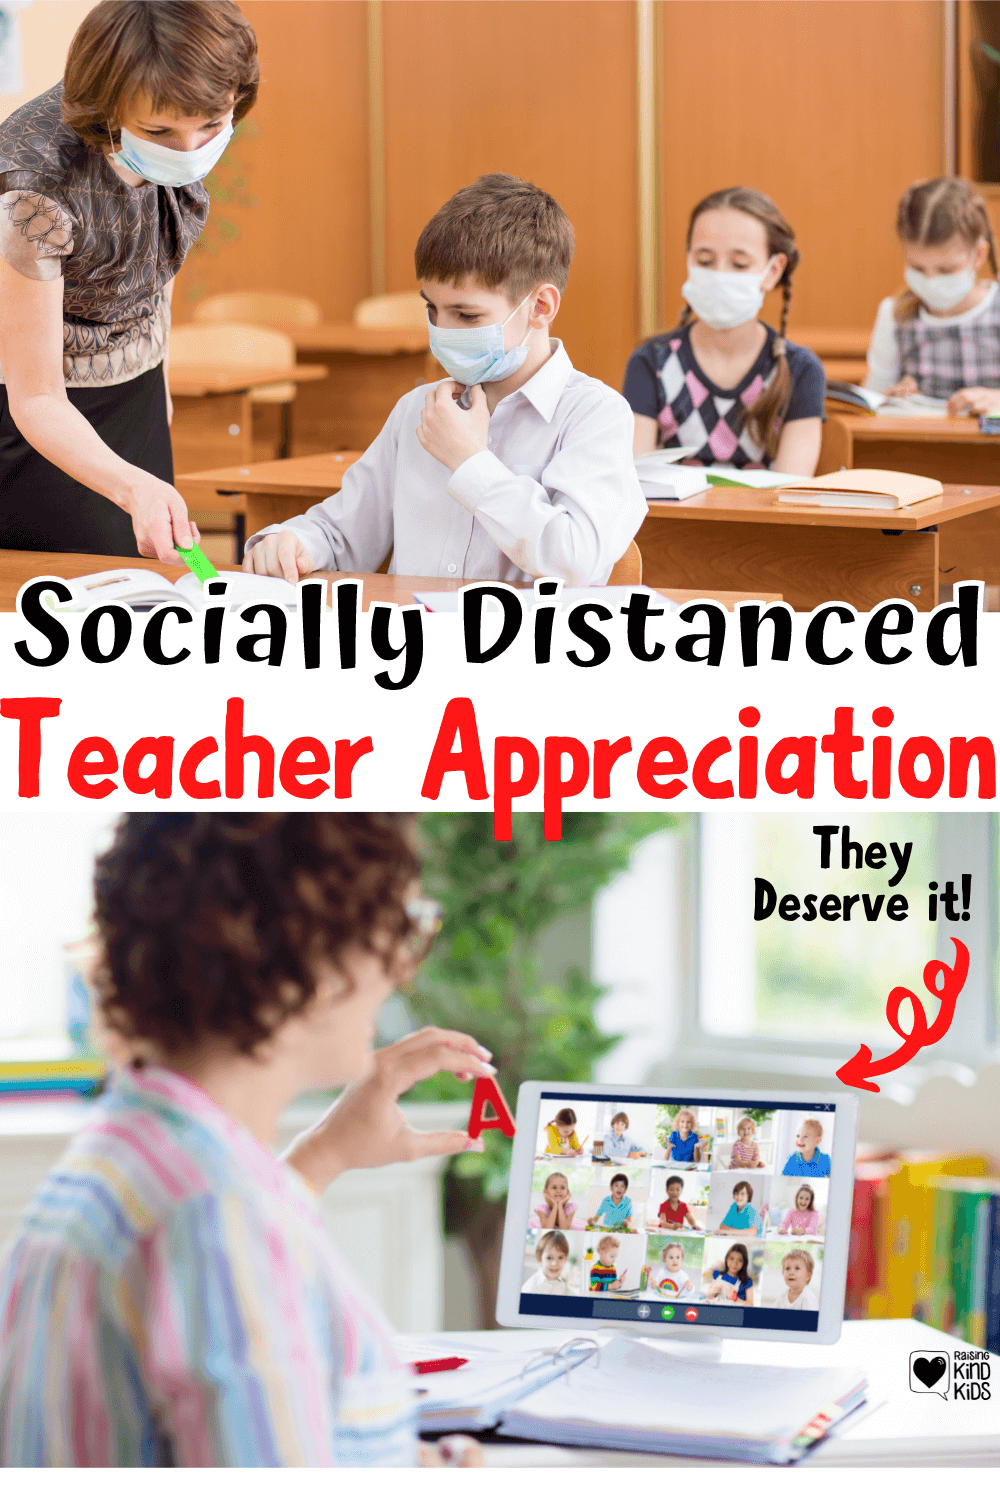 Teacher appreciation ideas to thank teachers during distance learning and the quarantine during covid-19. We can still thank and appreciation teachers during this pandemic with social distancing and safe teacher appreciation ideas. #teacherappreciation #distancelearningsocialdistancing #teacherappreciationdistancelearning